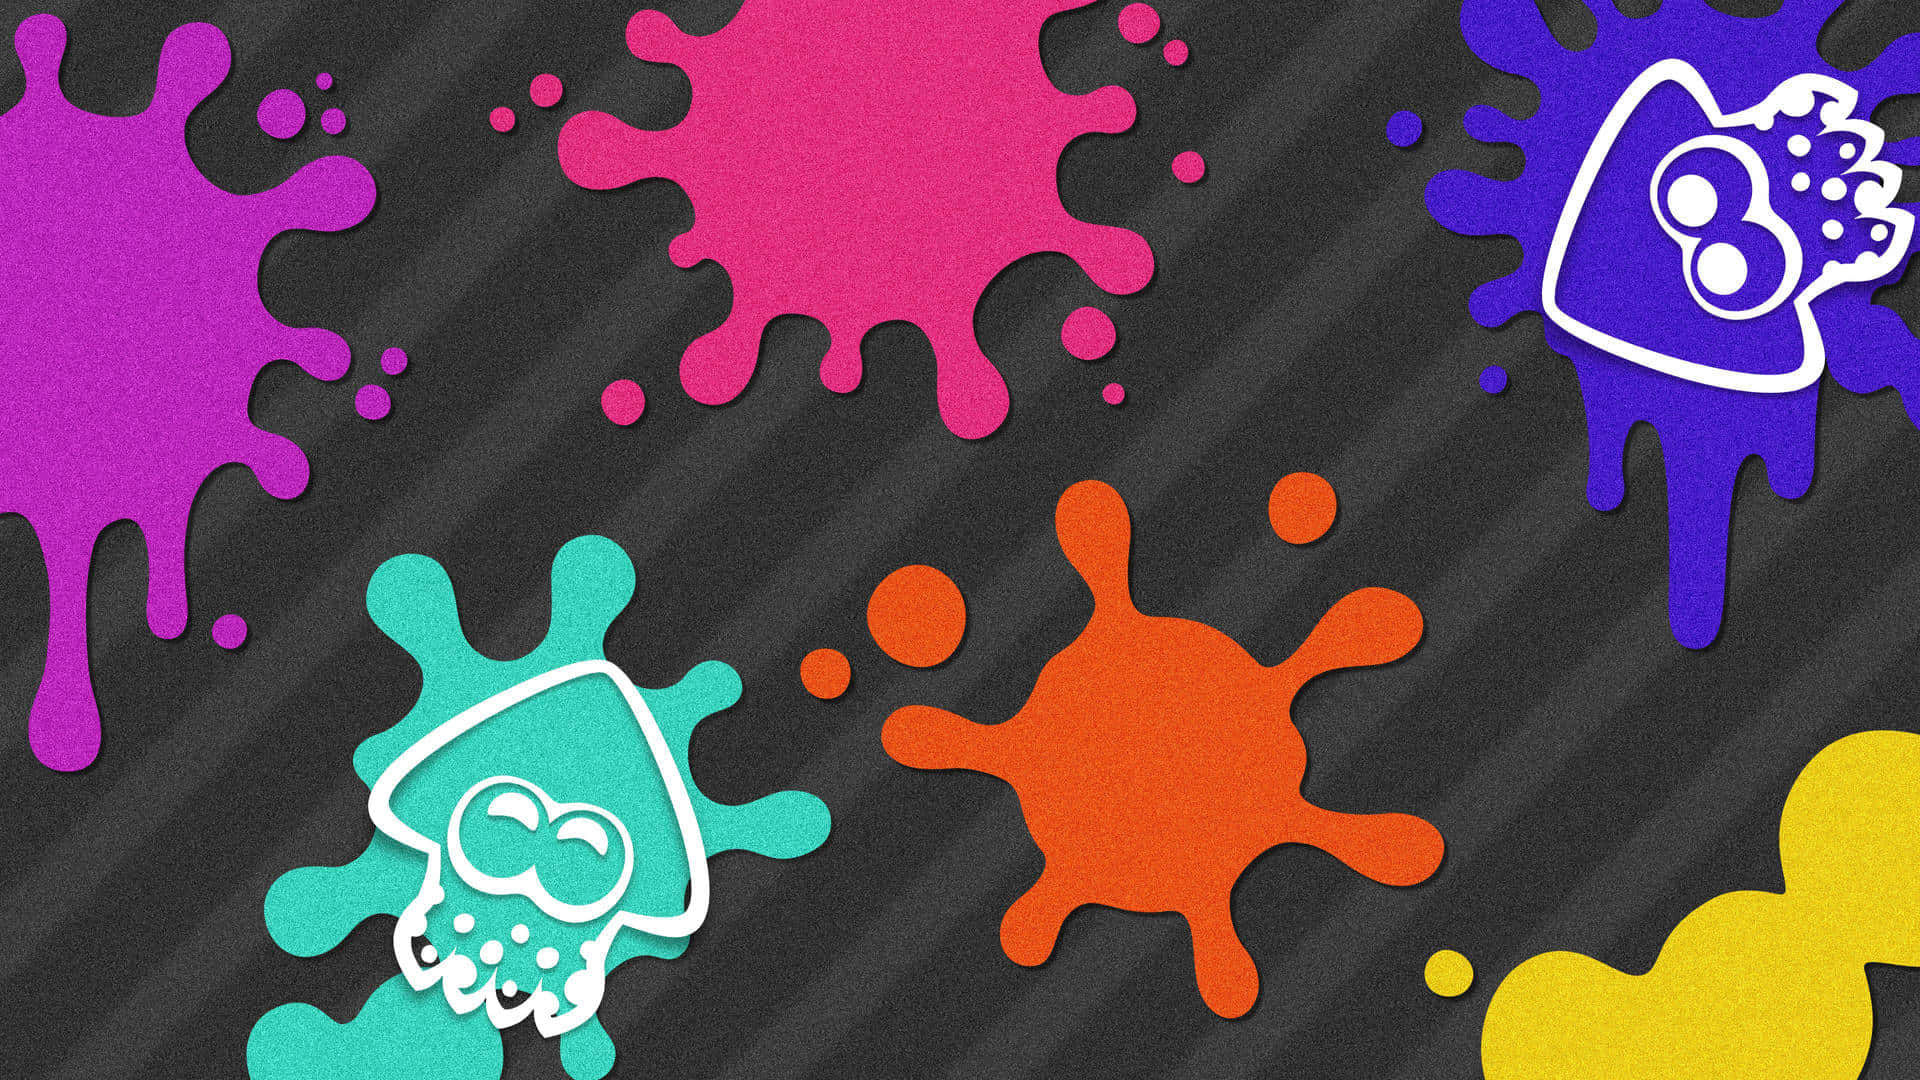 “Discover a Splash of Color with Splatoon!”